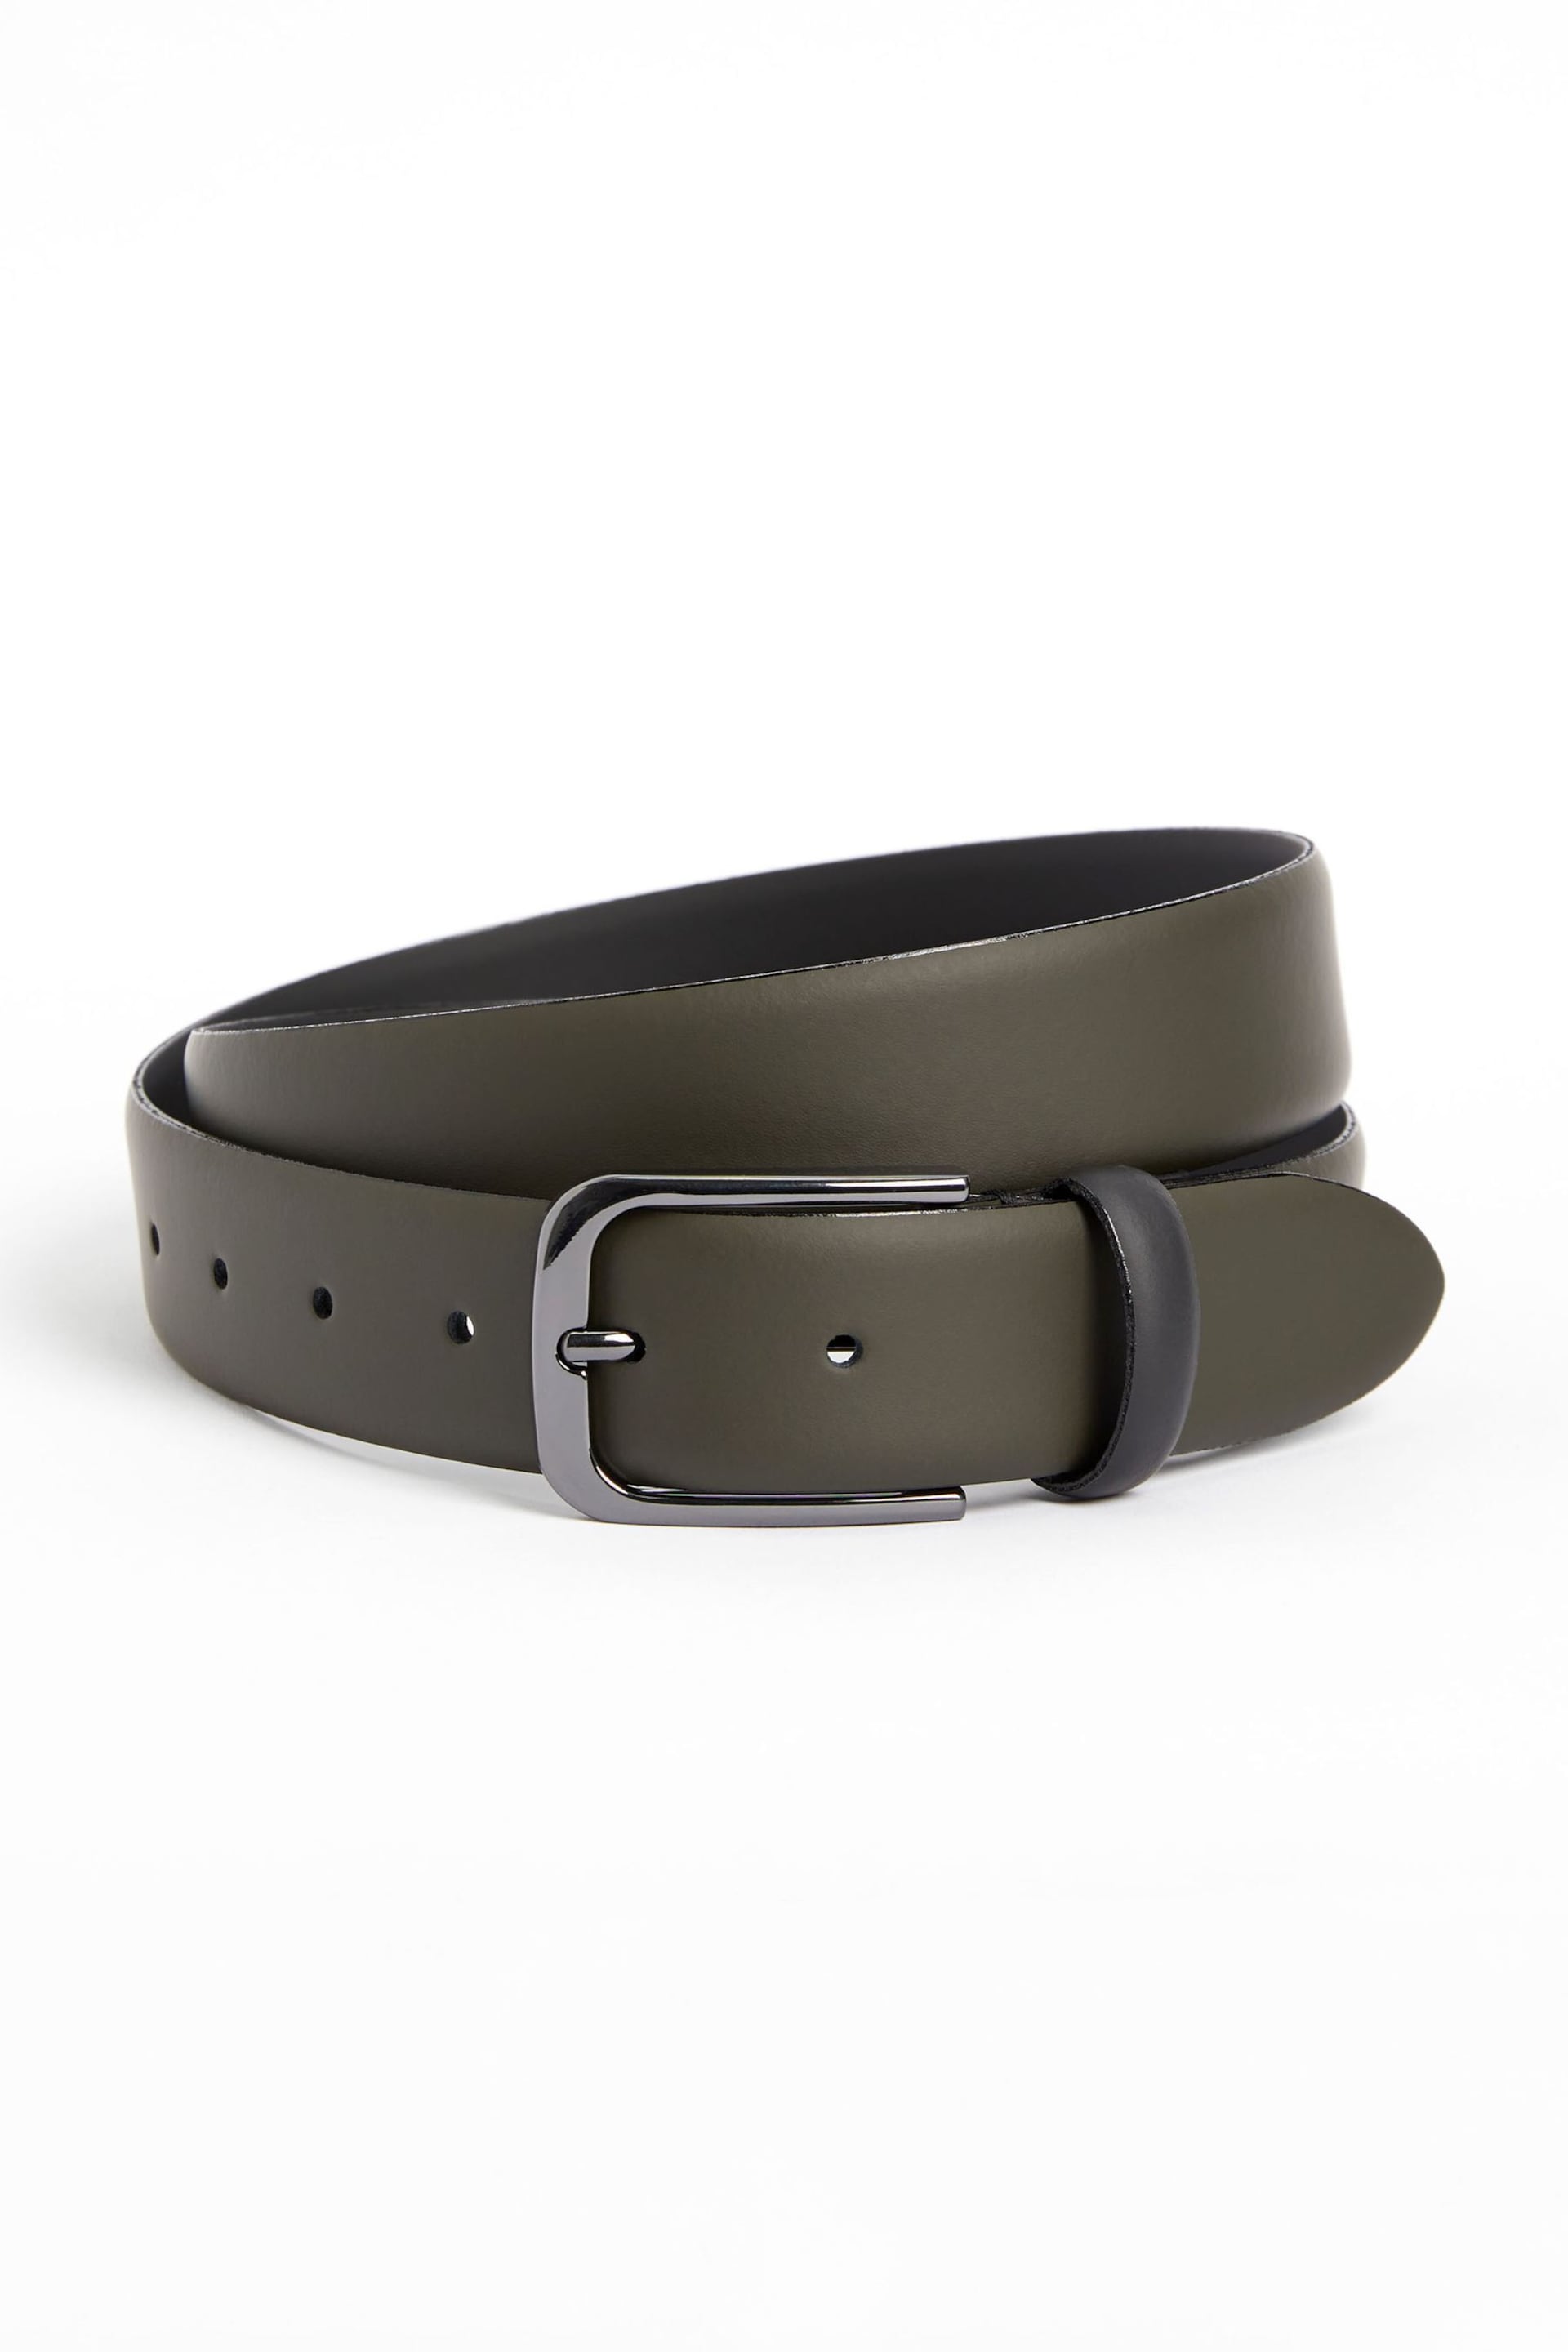 Green Smooth Leather Belt - Image 2 of 3